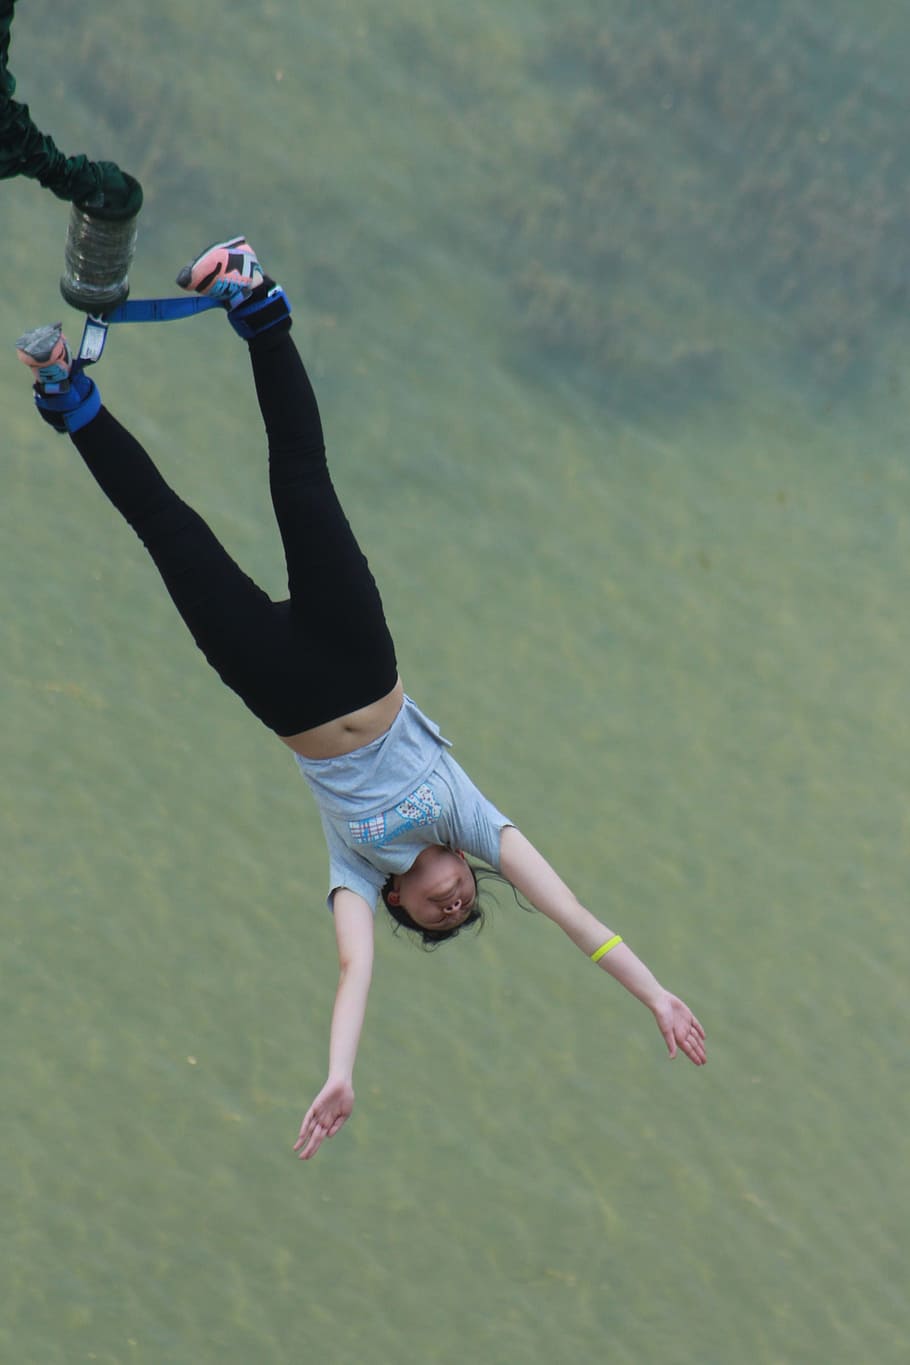 bungee jumping, jump, brave, one person, lifestyles, leisure activity, real people, water, day, full length